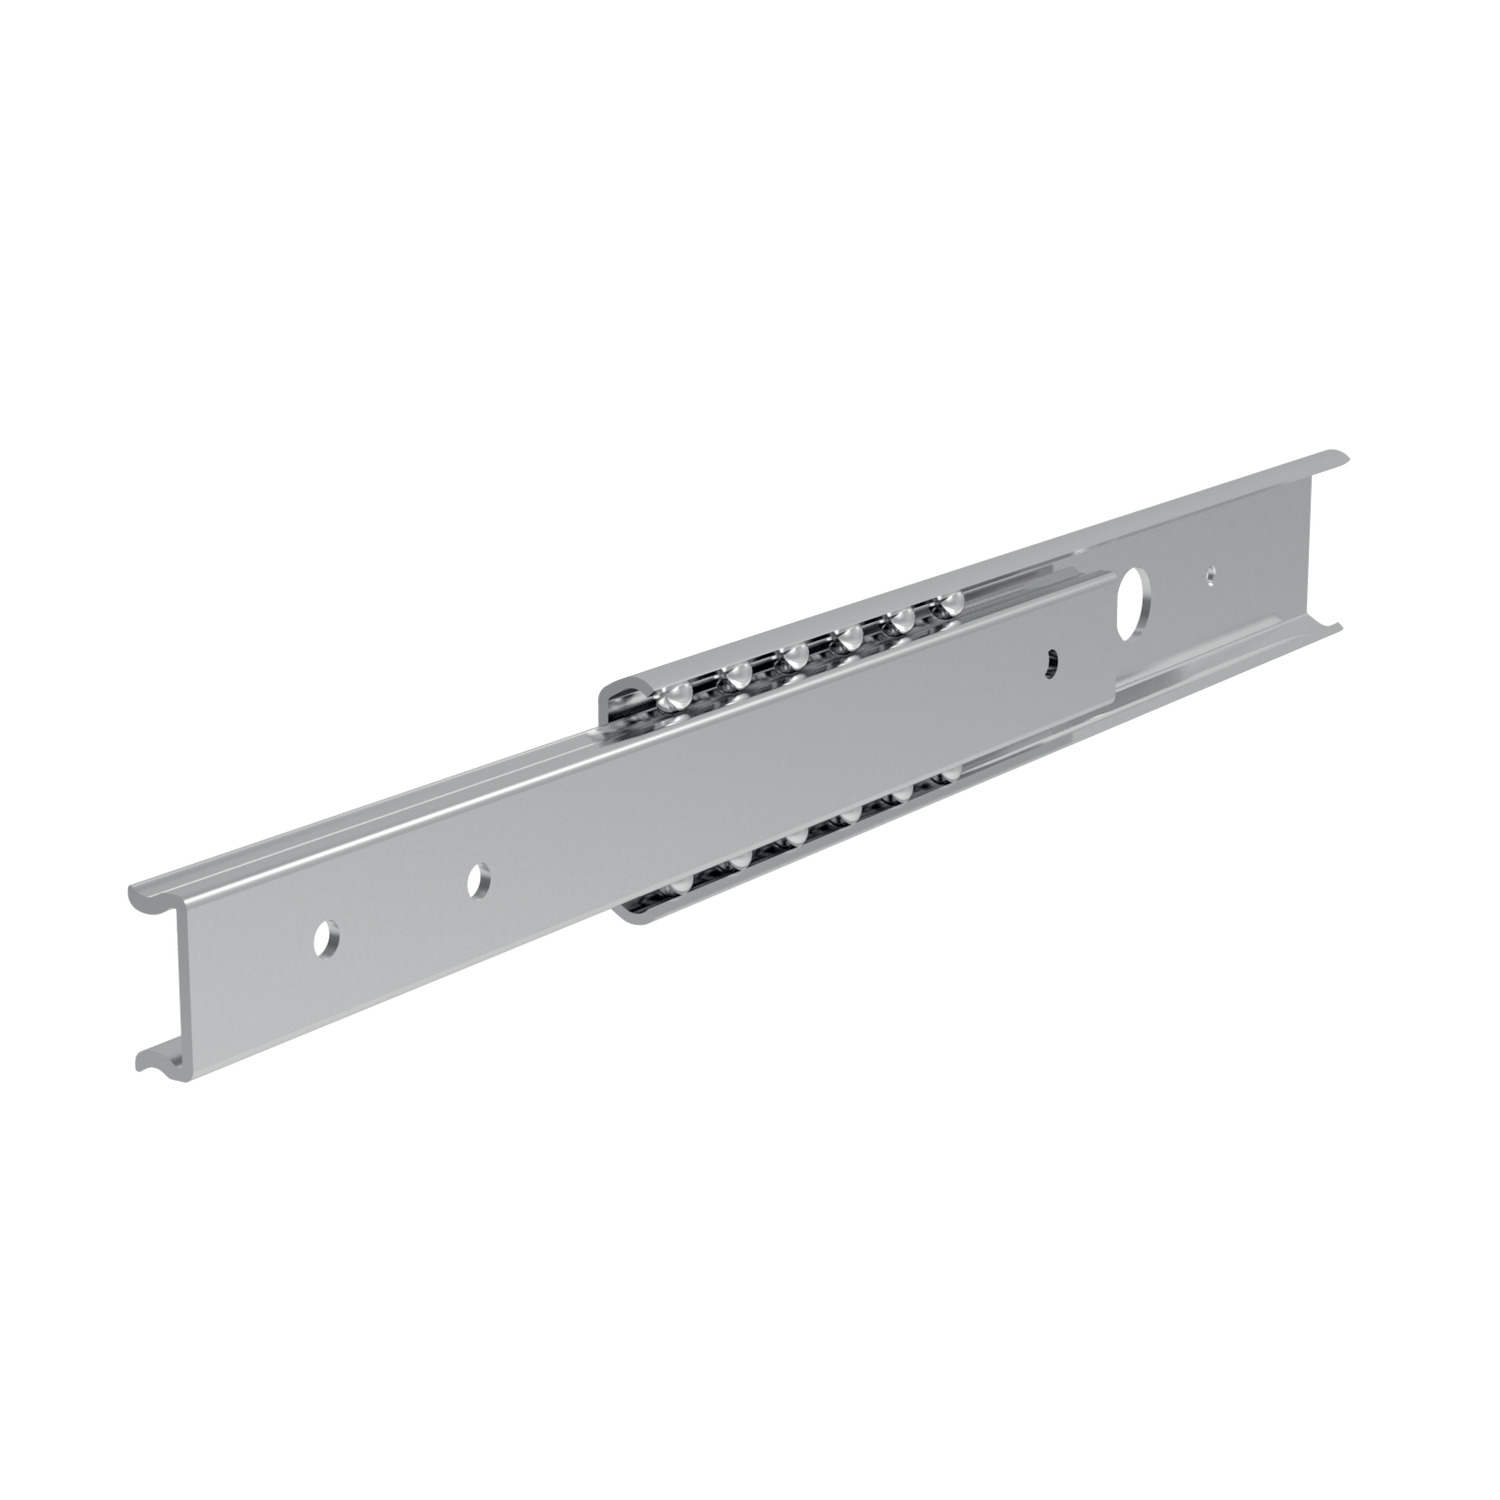 Semi-Telescopic Drawer Slides Galvanized steel drawer slides, loads up to 17.5Kg per pair. Hardened steel balls with plastic ball cage. Fix with M5 countersunk screws.